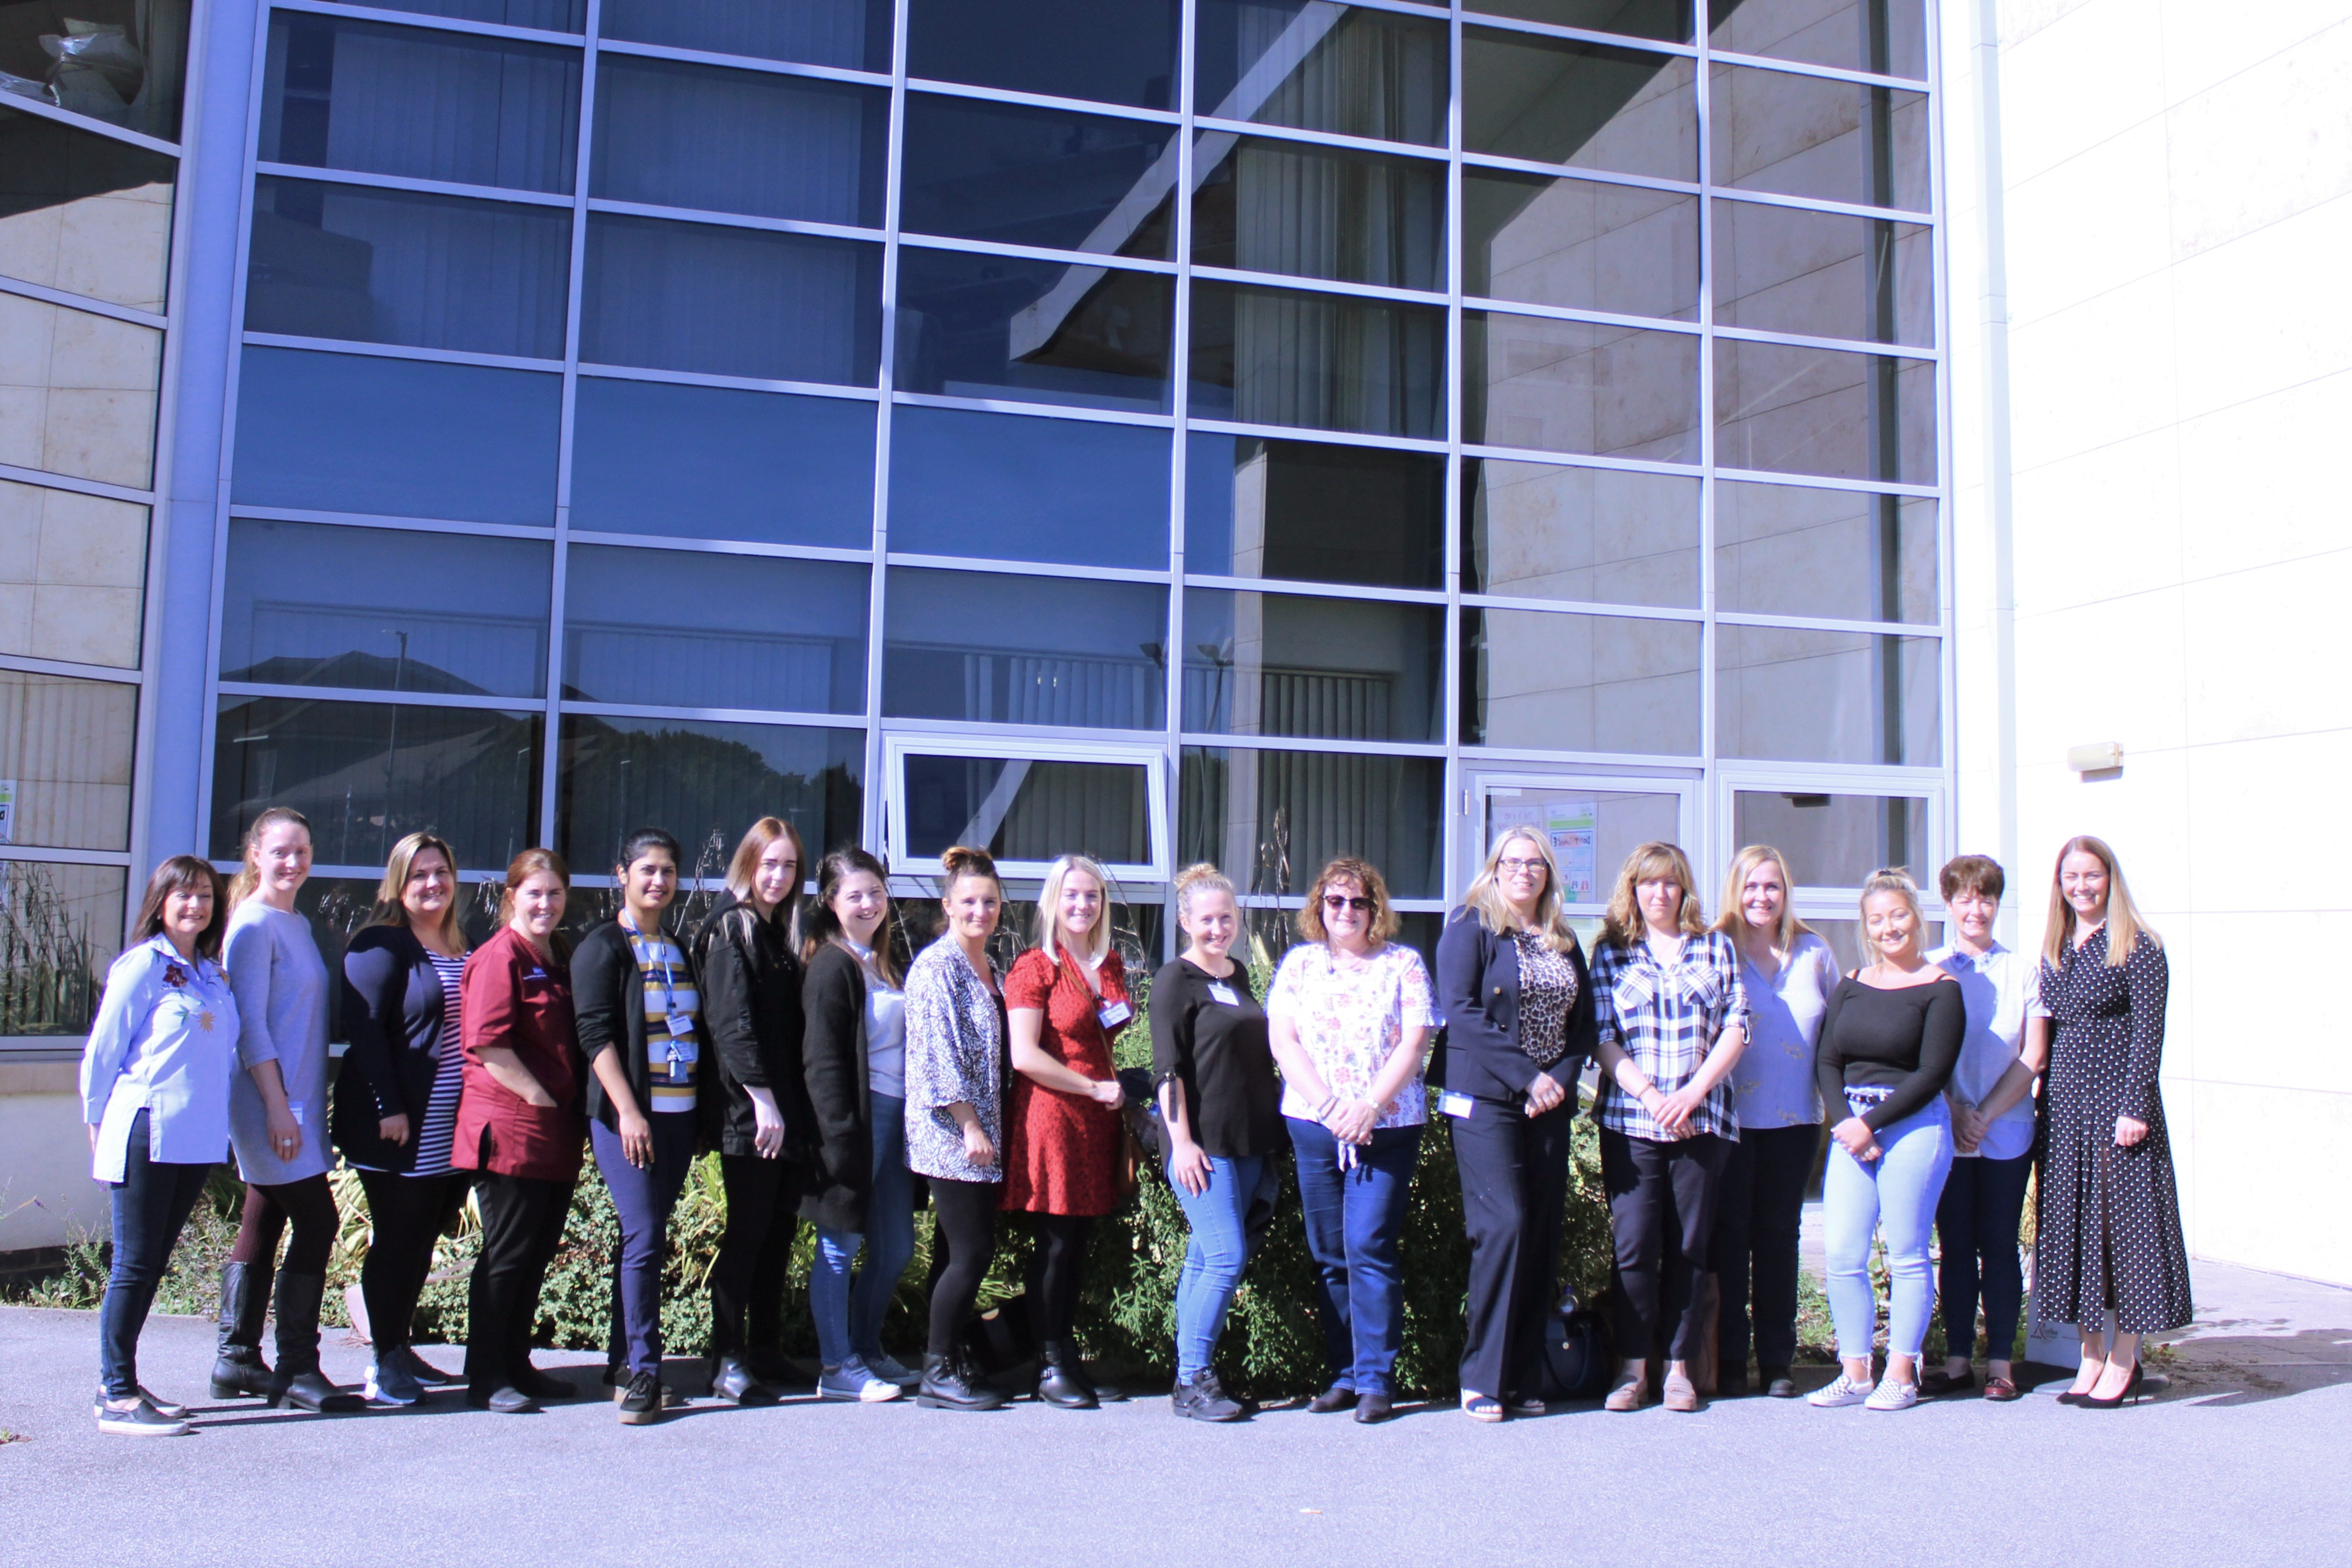 Warm welcome for new Mammography Associate apprentices